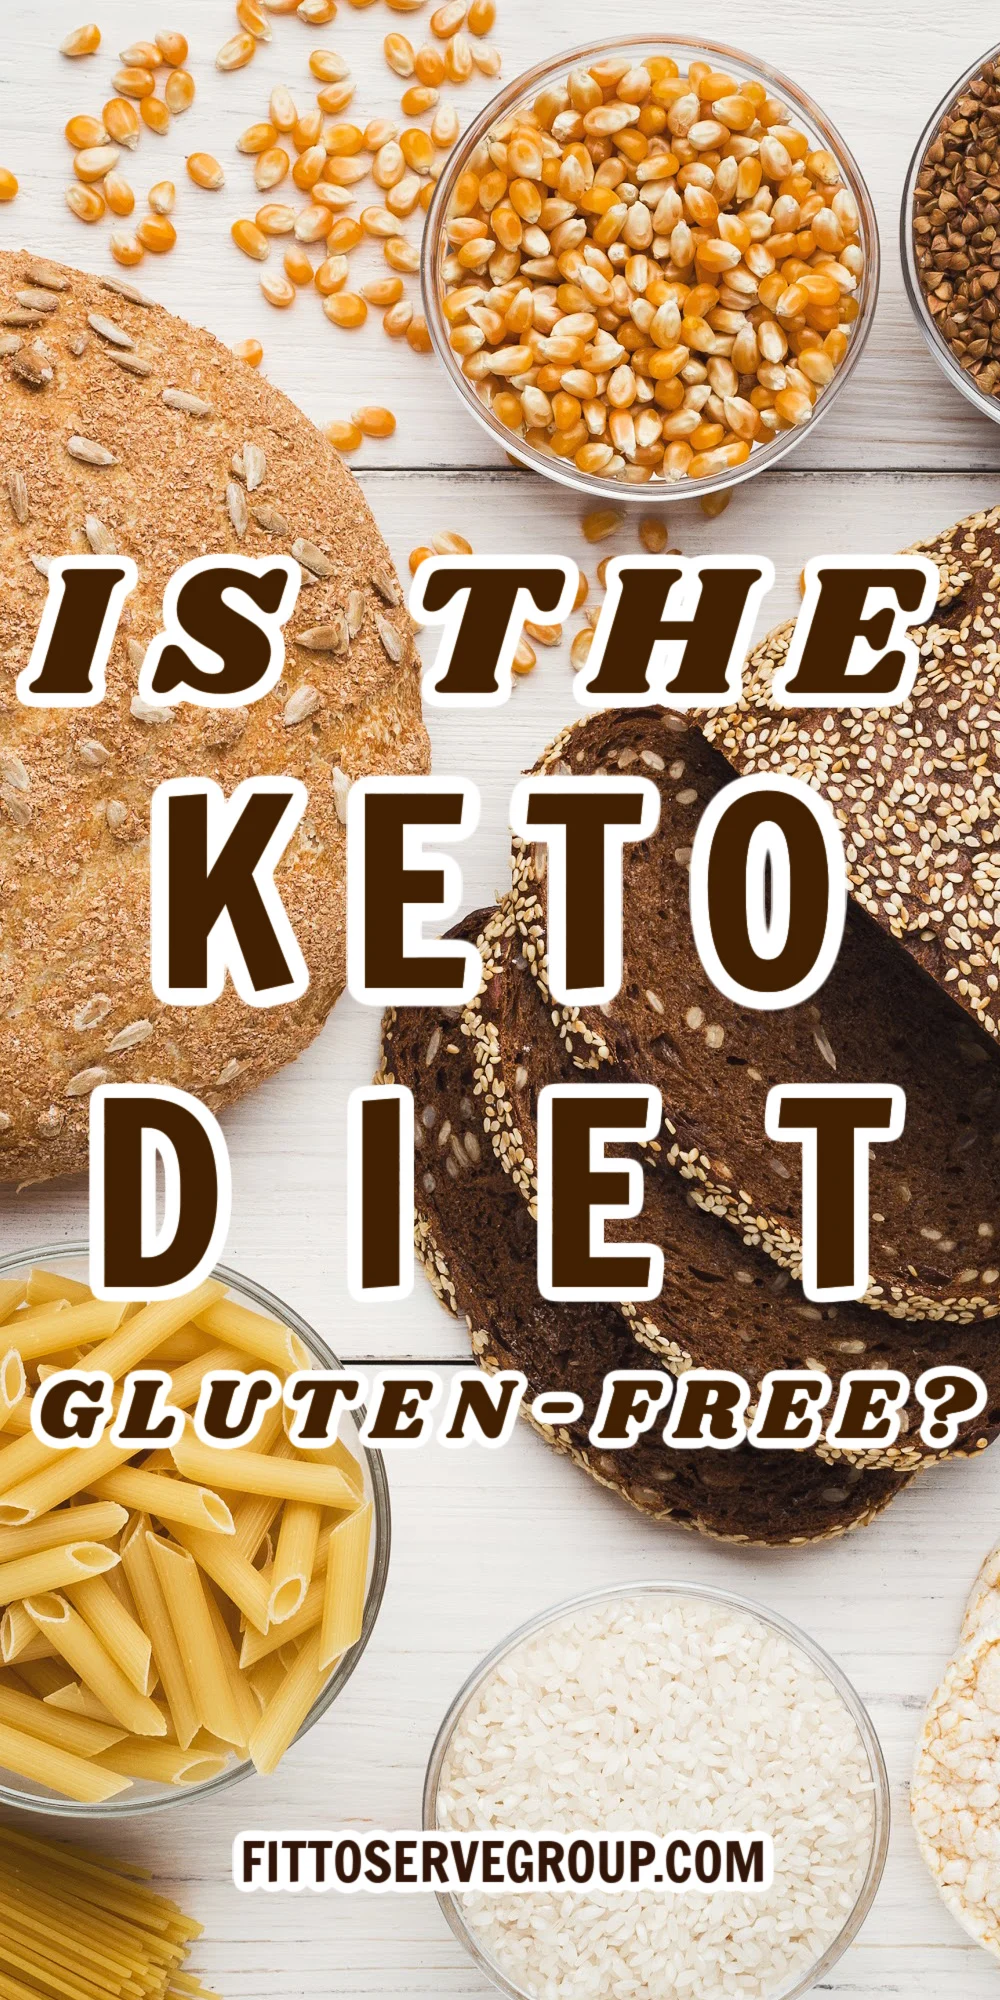 The differences between a gluten-free diet and a keto diet 